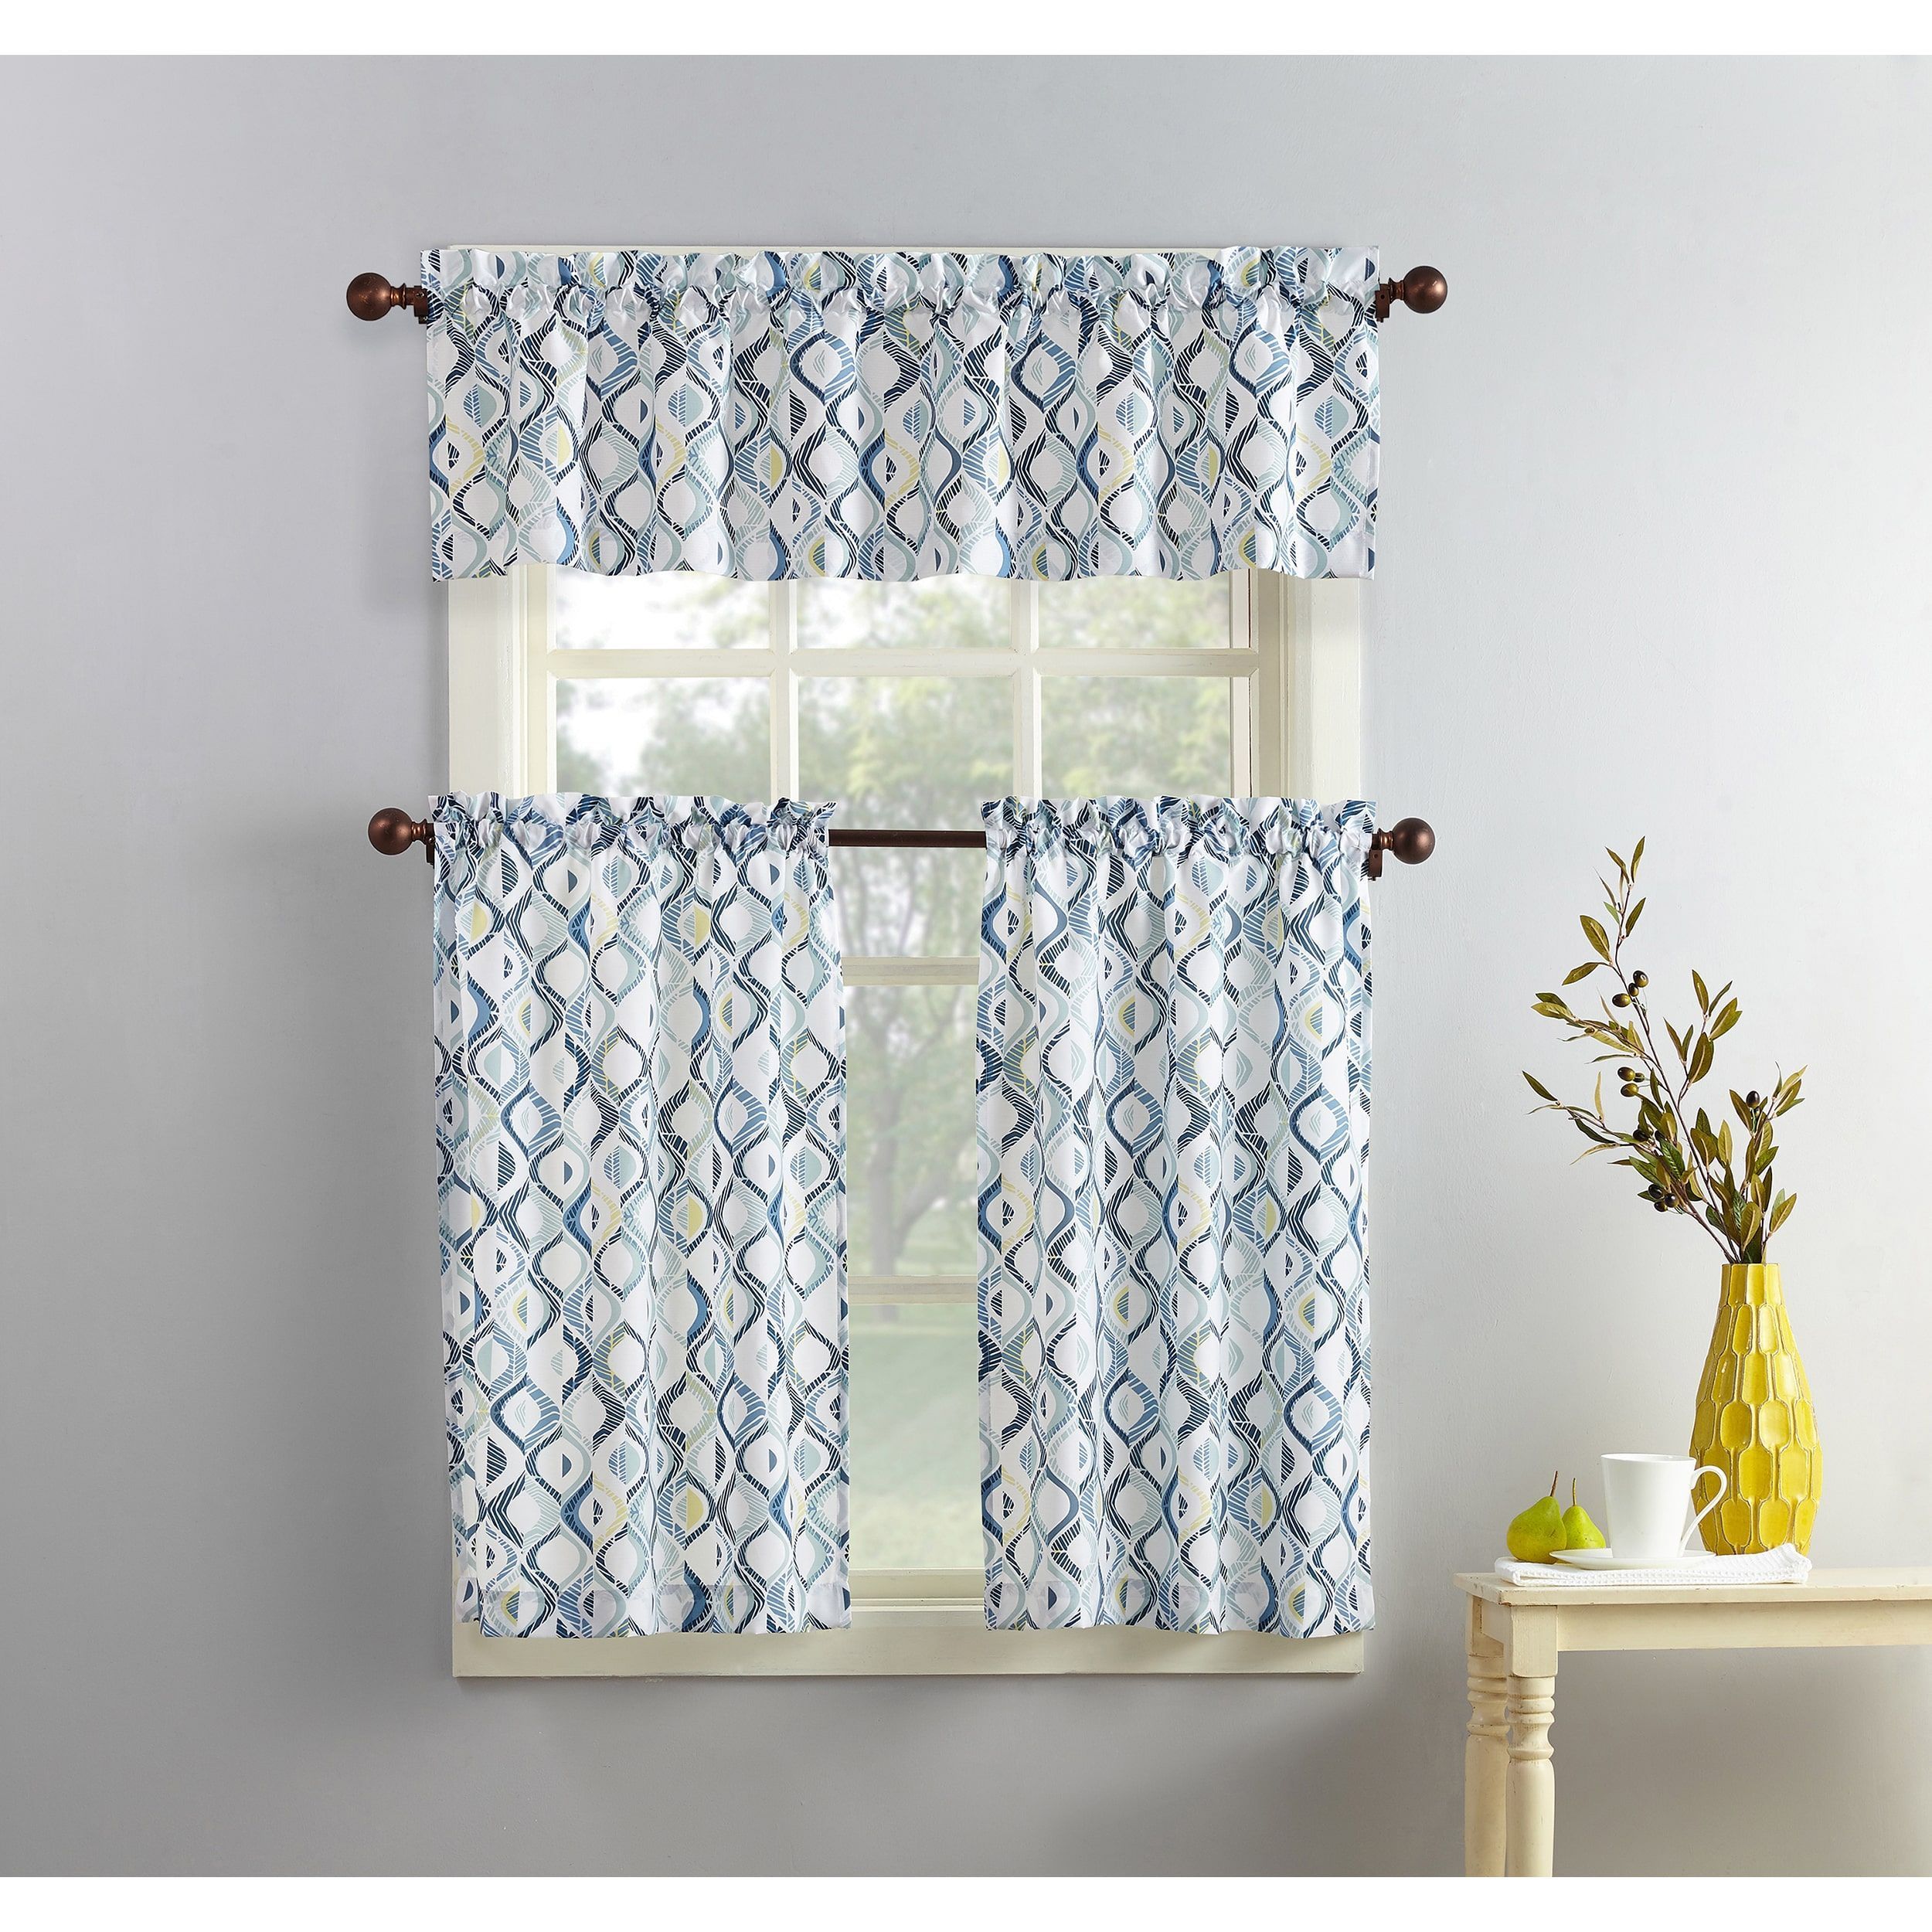 No. 918 Geometric Print Microfiber 3 Piece Kitchen Curtain In Microfiber 3 Piece Kitchen Curtain Valance And Tiers Sets (Photo 4 of 20)